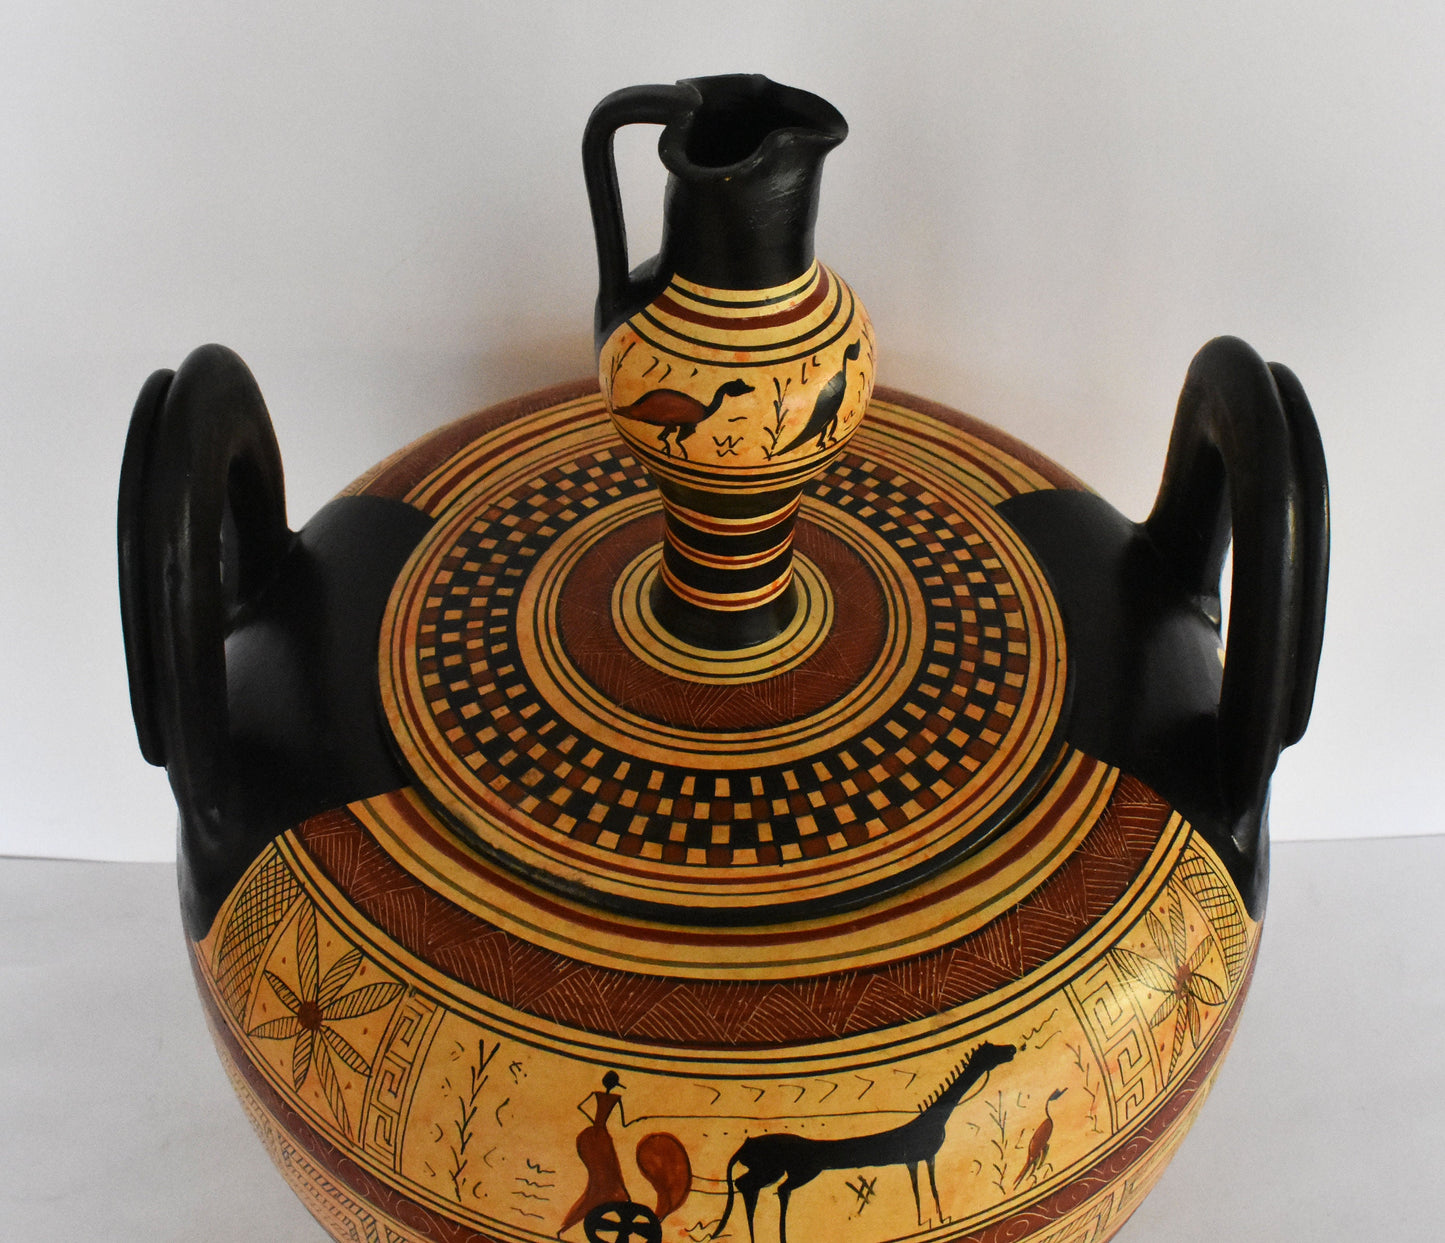 Geometric period Vessel - Man on a Chariot, Animals, Meander and Rosette Motives - Ceramic Vase